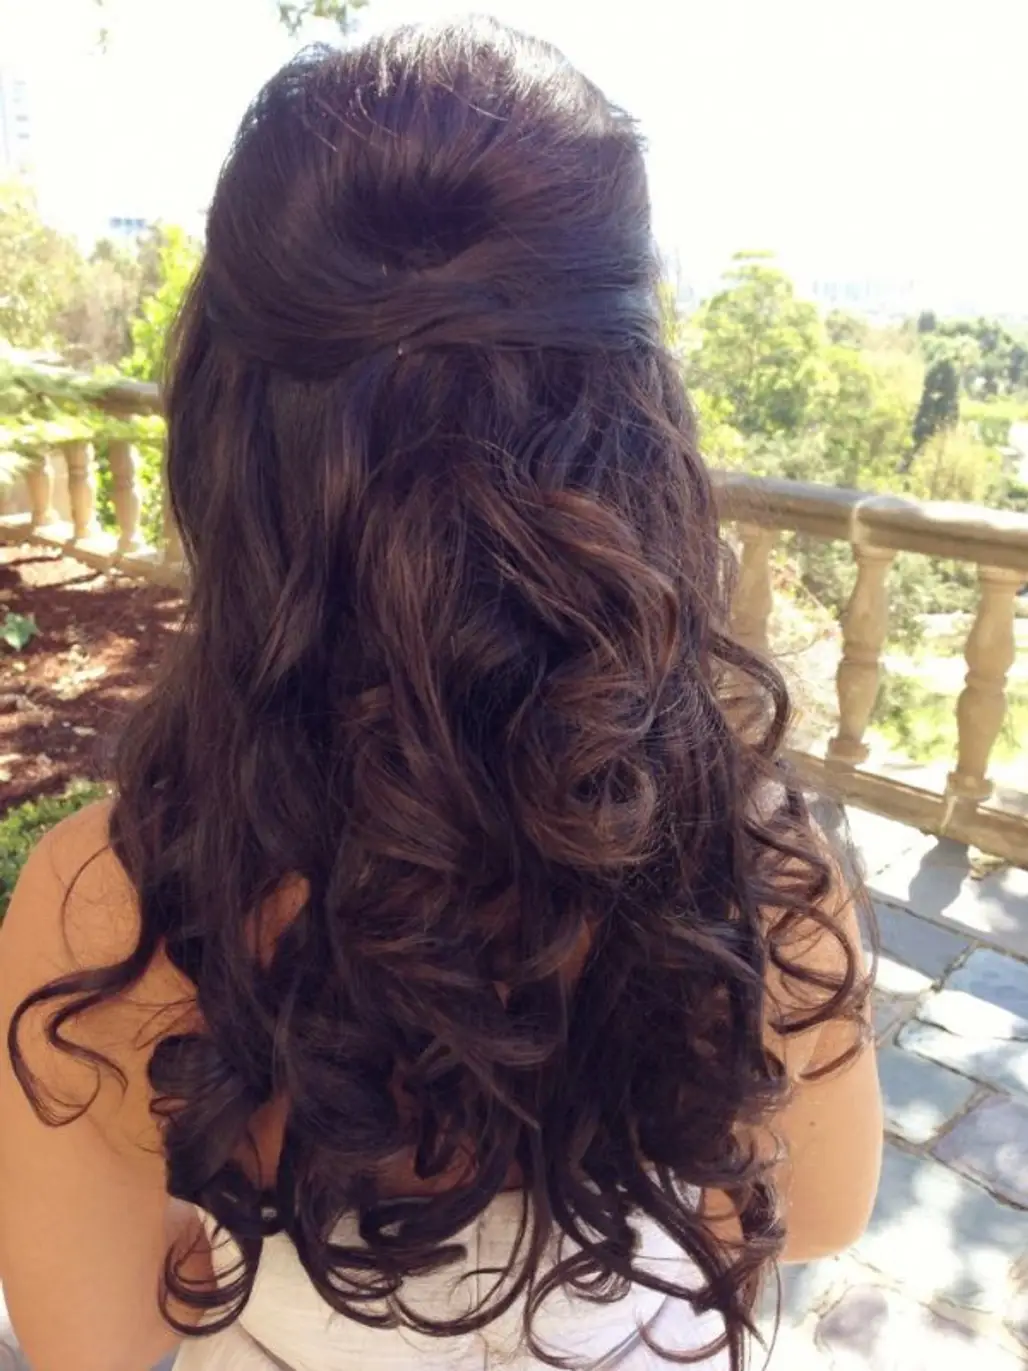 Perfect Curls in a Half-up Style